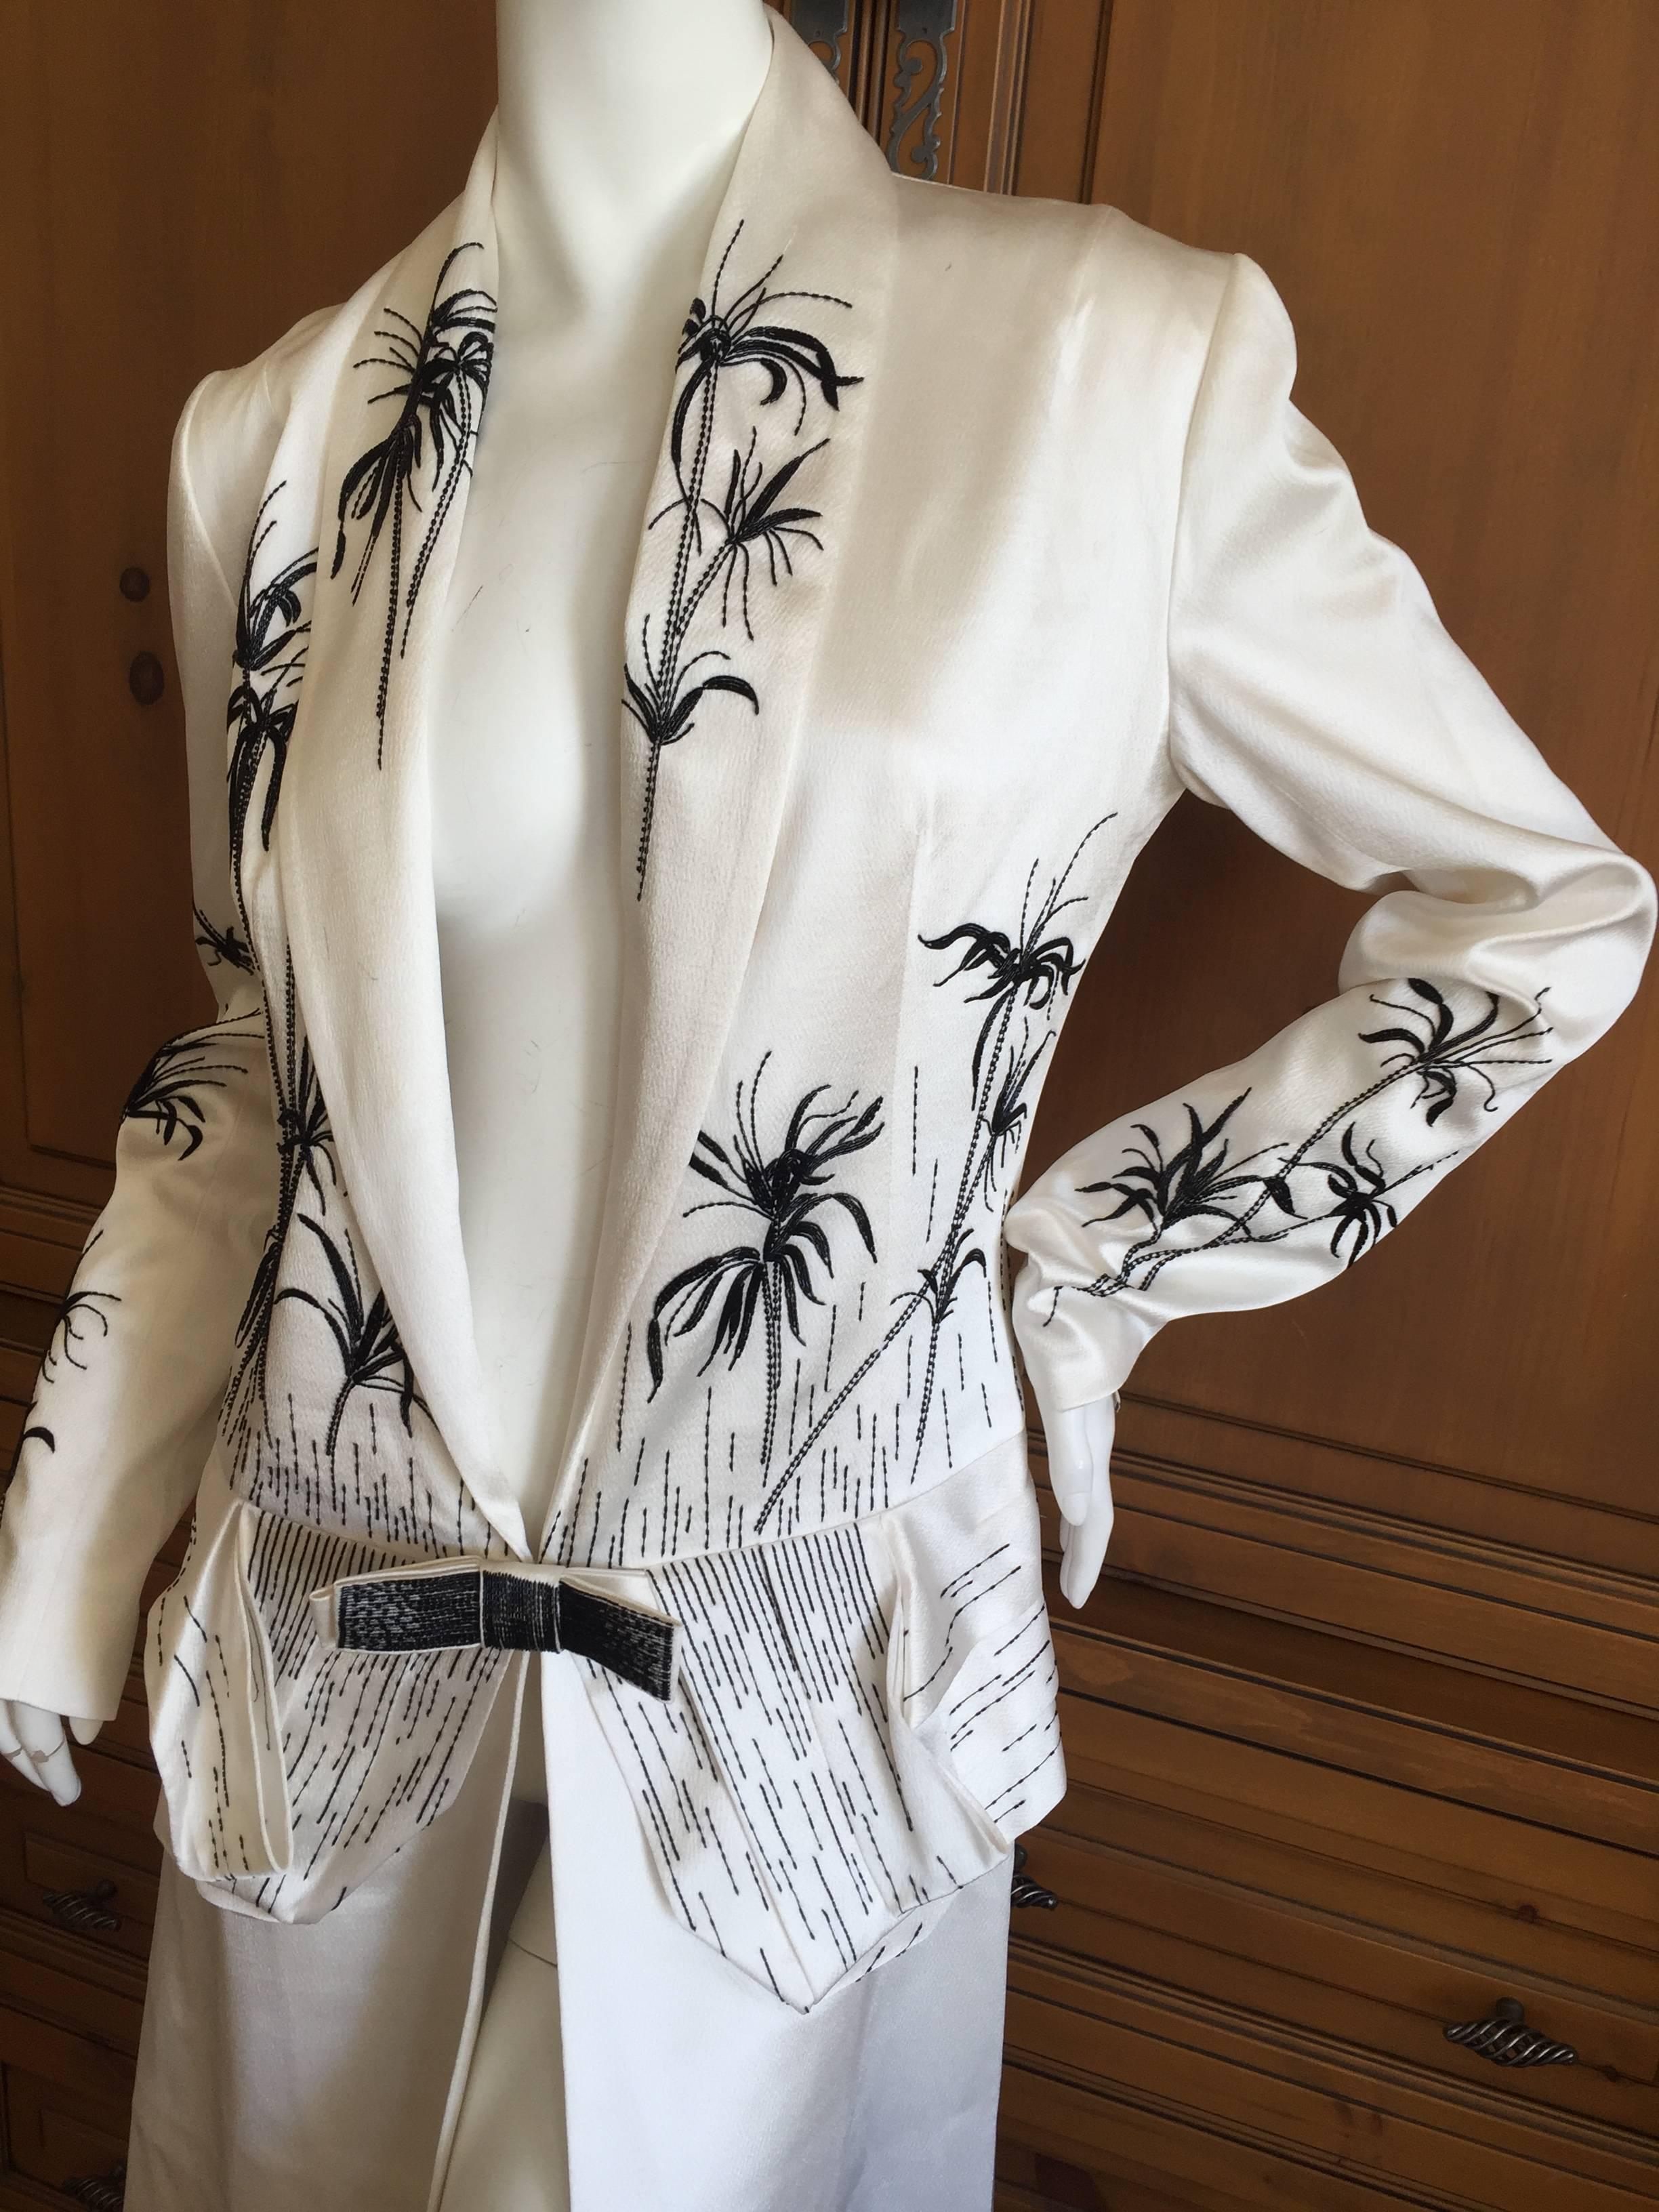 Christian Dior by Gianfranco Ferre White Hammered Silk Beaded Evening Coat.
Exquisite white coat with beaded flowers created from tiny white bugle beads.
This was created by Gianfranco Ferre in the early 1990's for Christian Dior.
It still has